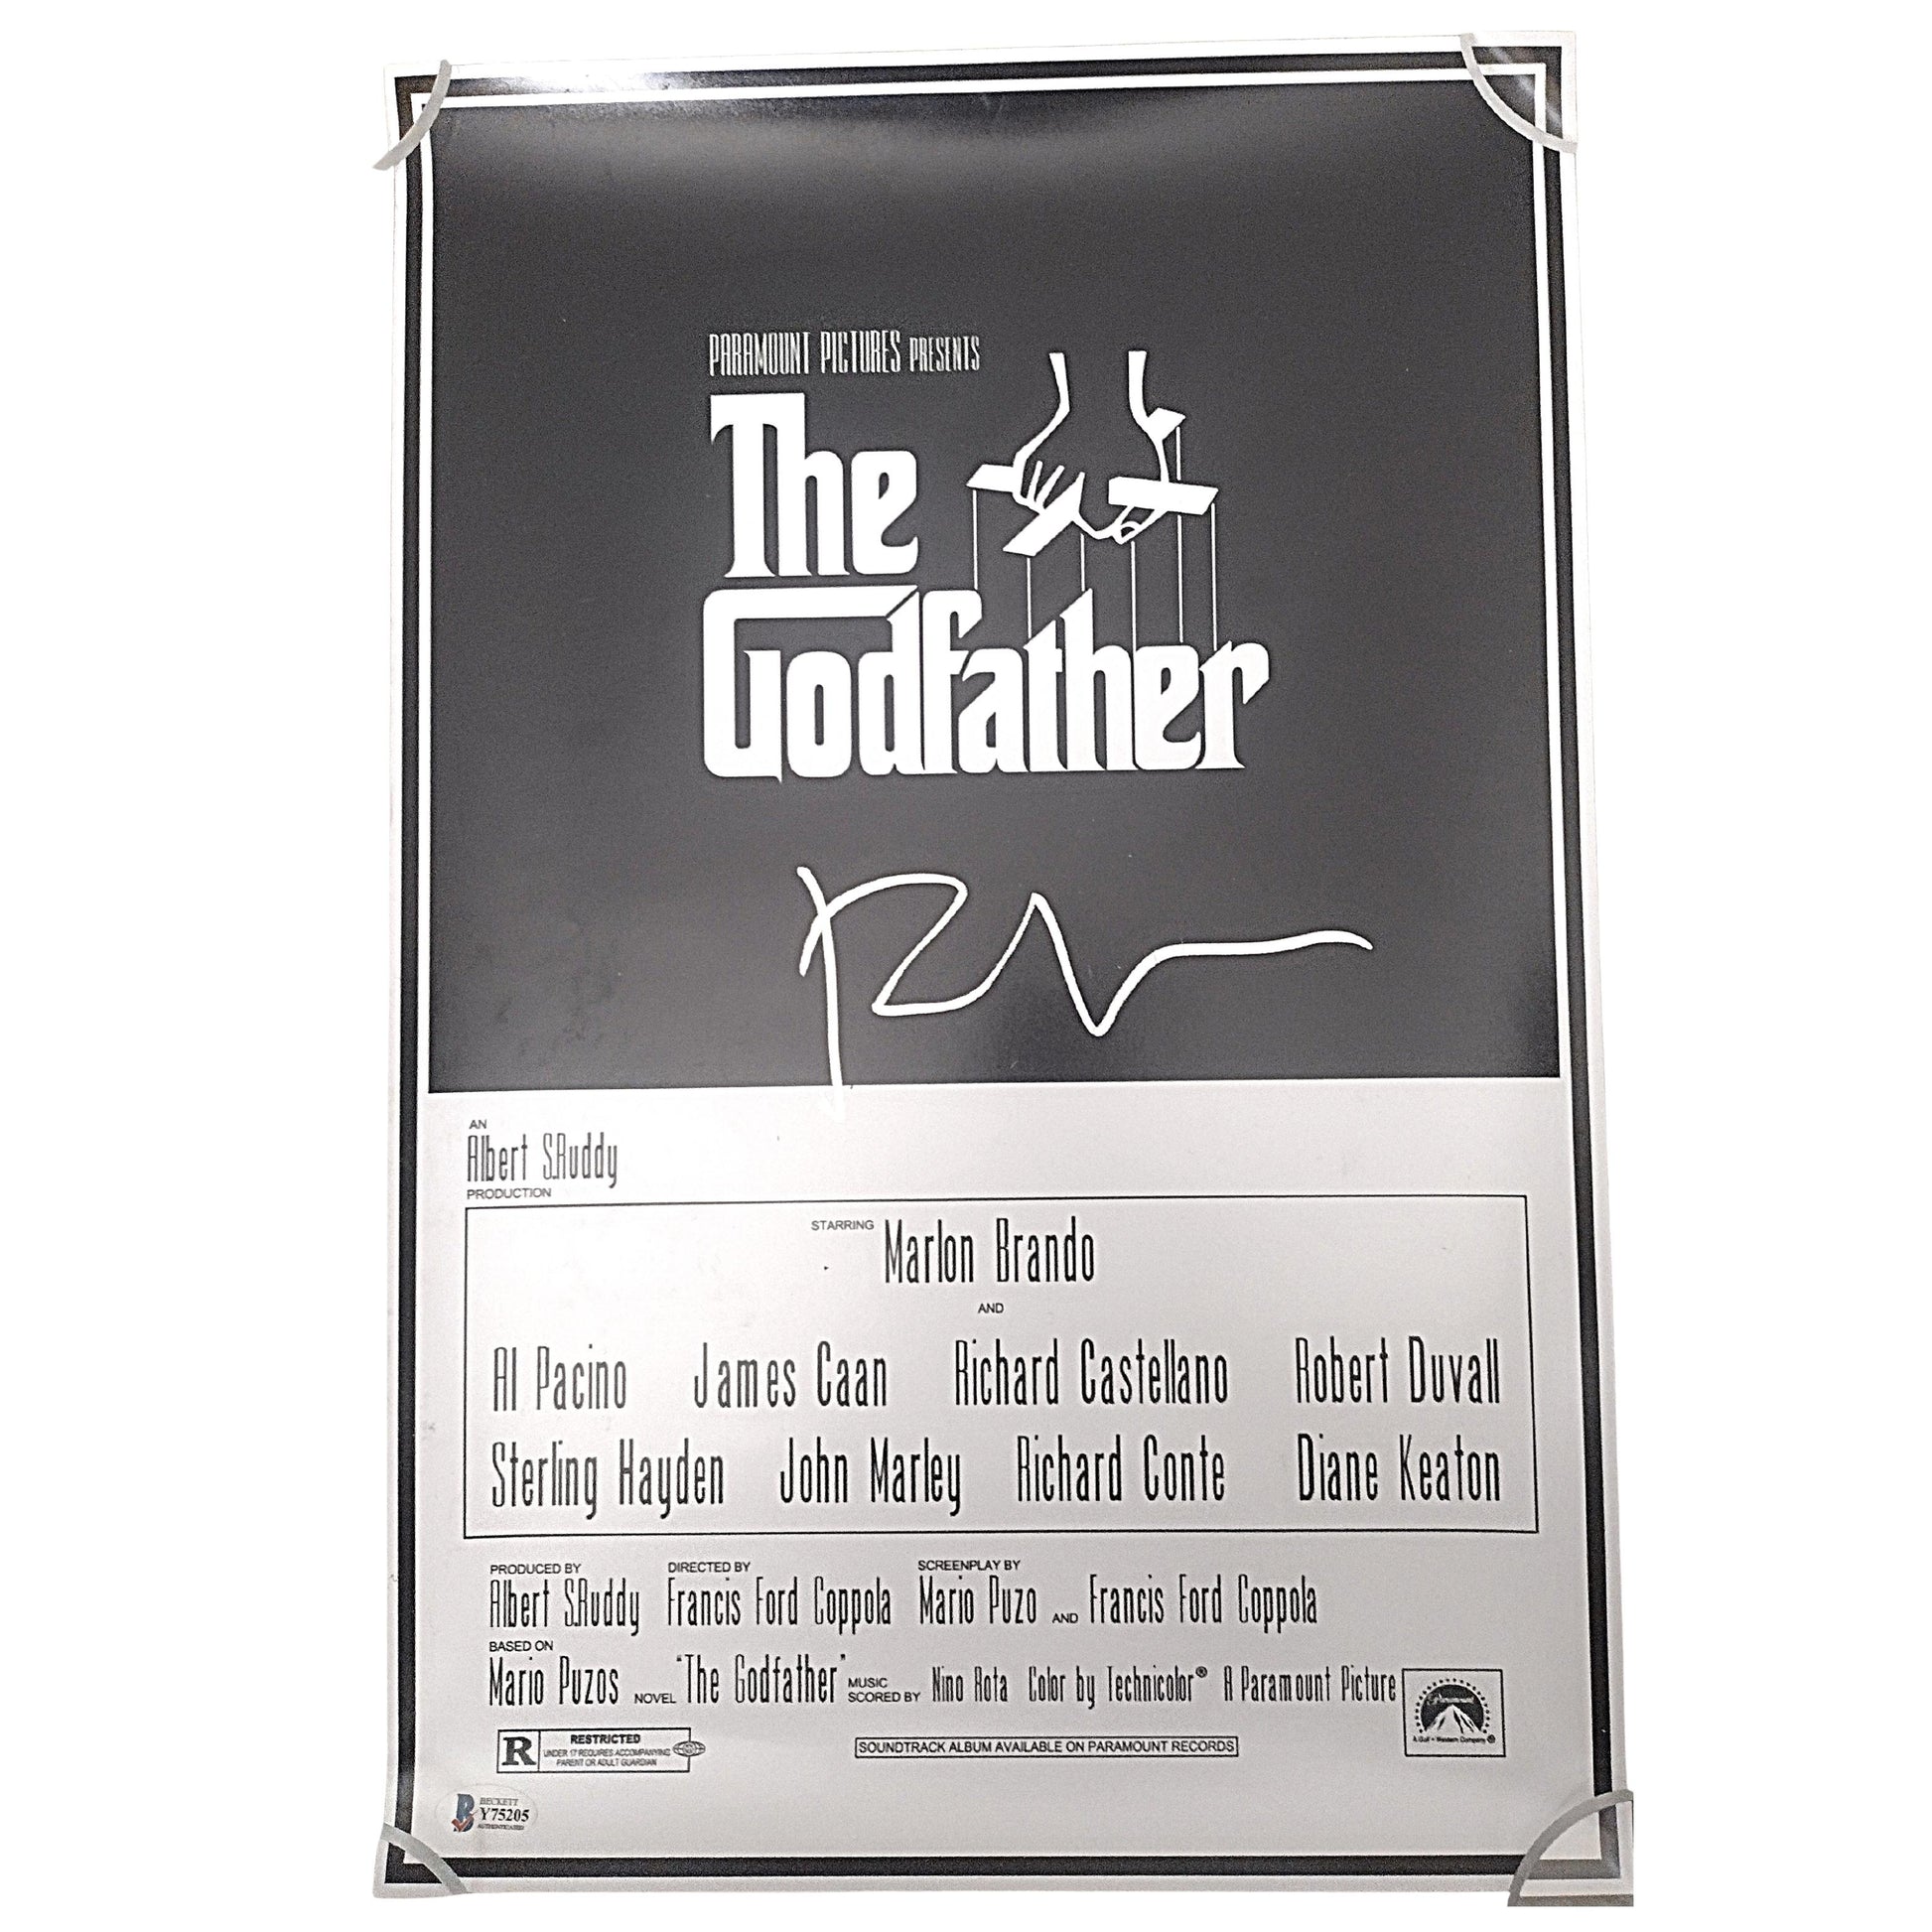 Hollywood- Autographed- Francis Ford Coppola Signed The Godfather 12x18 Inch Movie Poster Beckett Certified 101